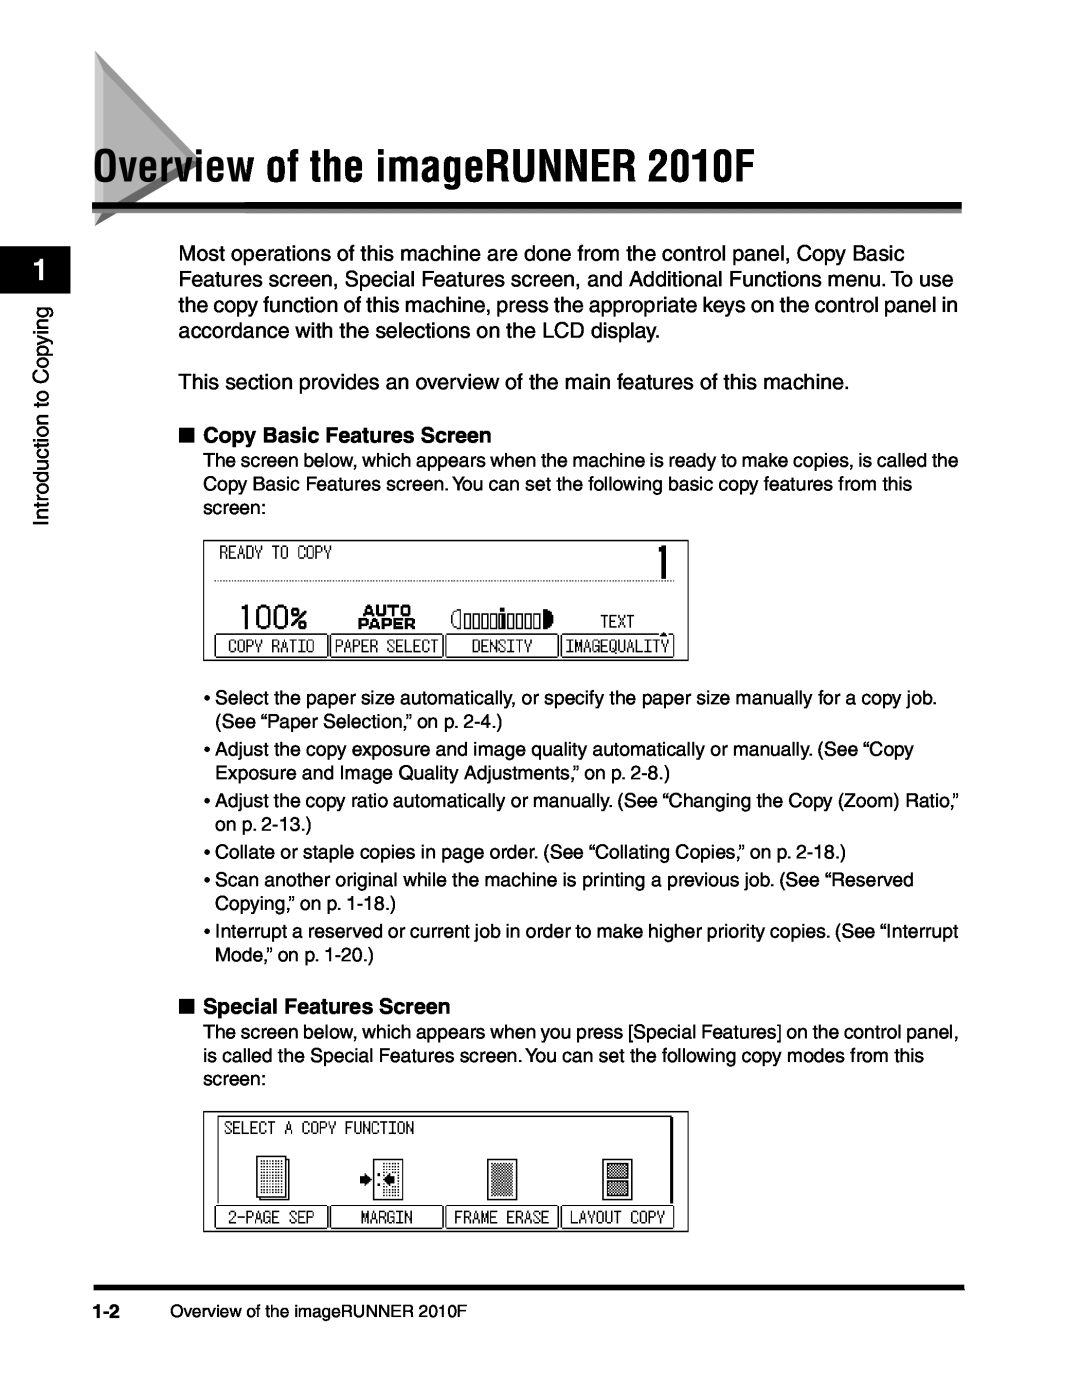 Canon Overview of the imageRUNNER 2010F, Introduction to Copying, Copy Basic Features Screen, Special Features Screen 